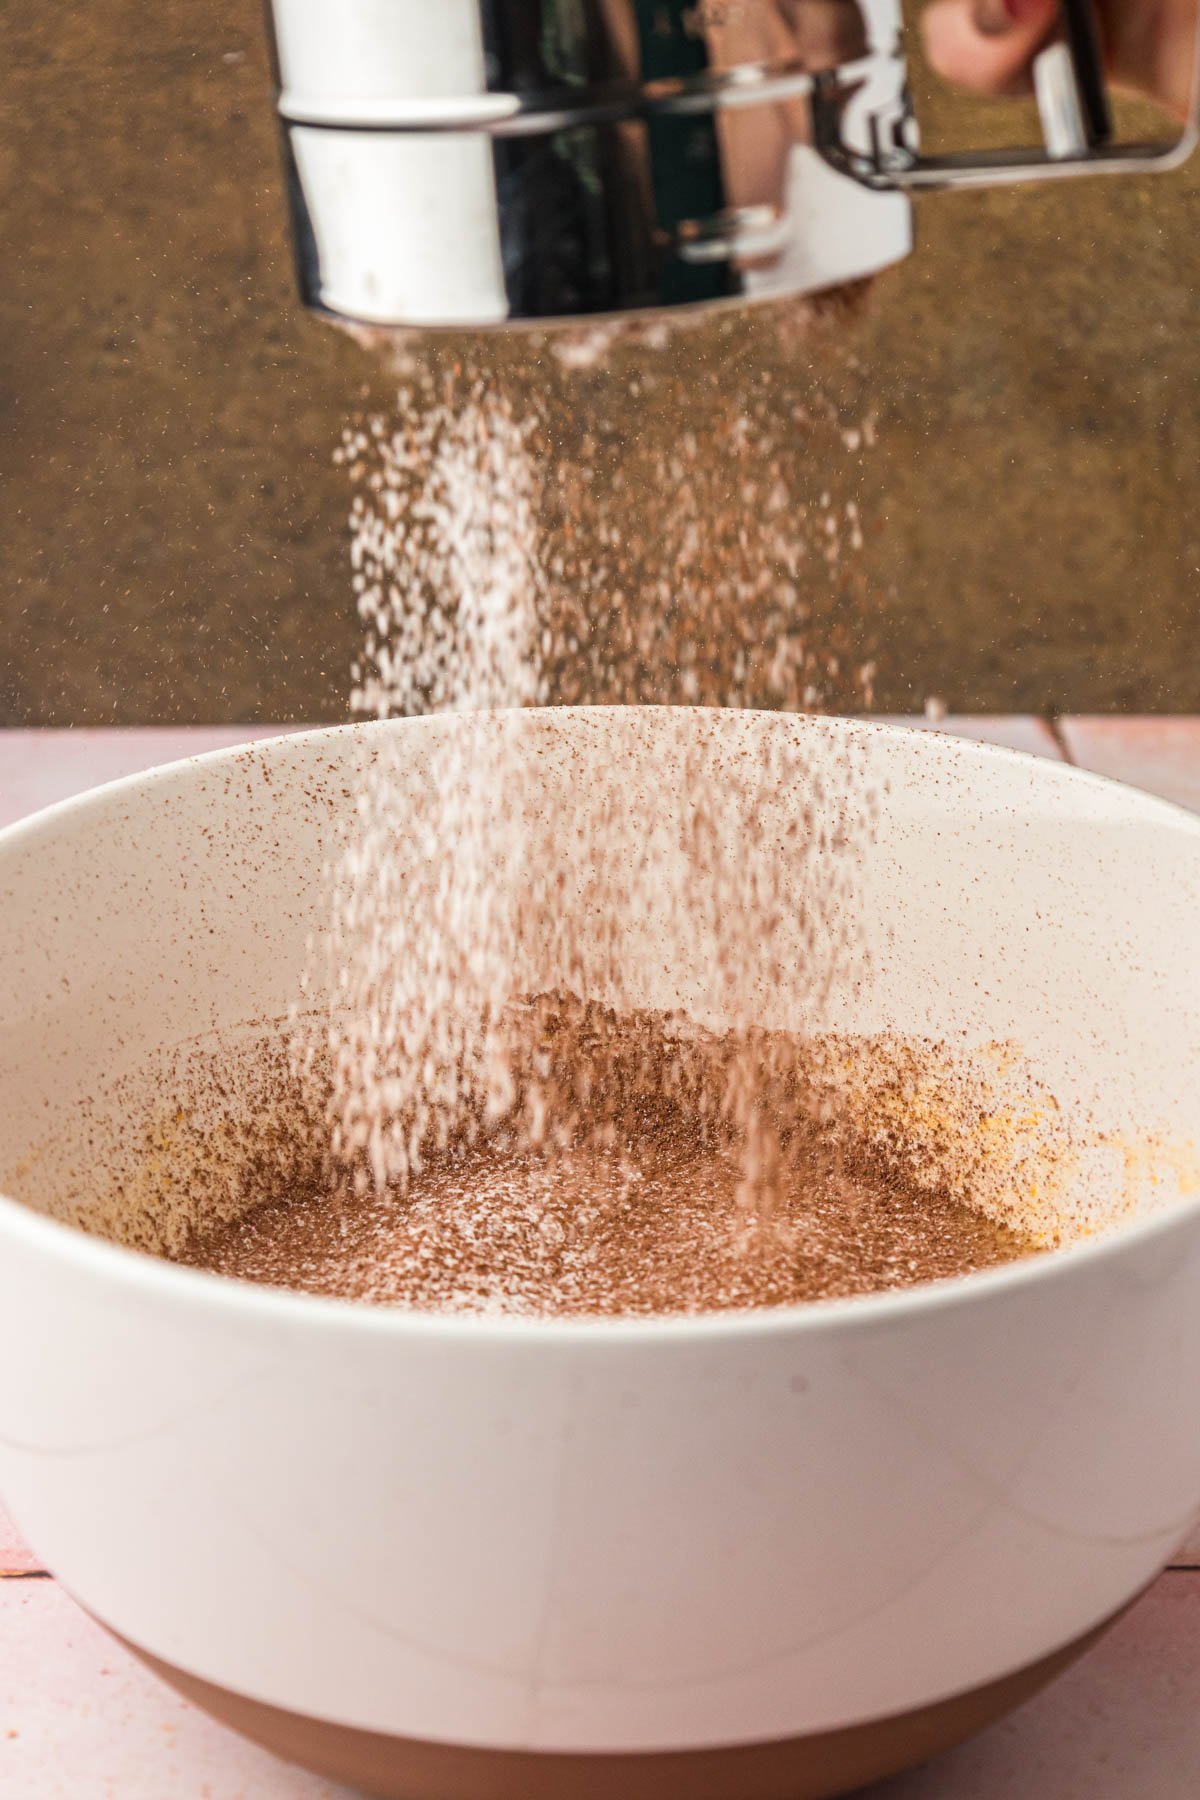 Flour and cocoa powder being sifted into a white bowl to make brownie batter.